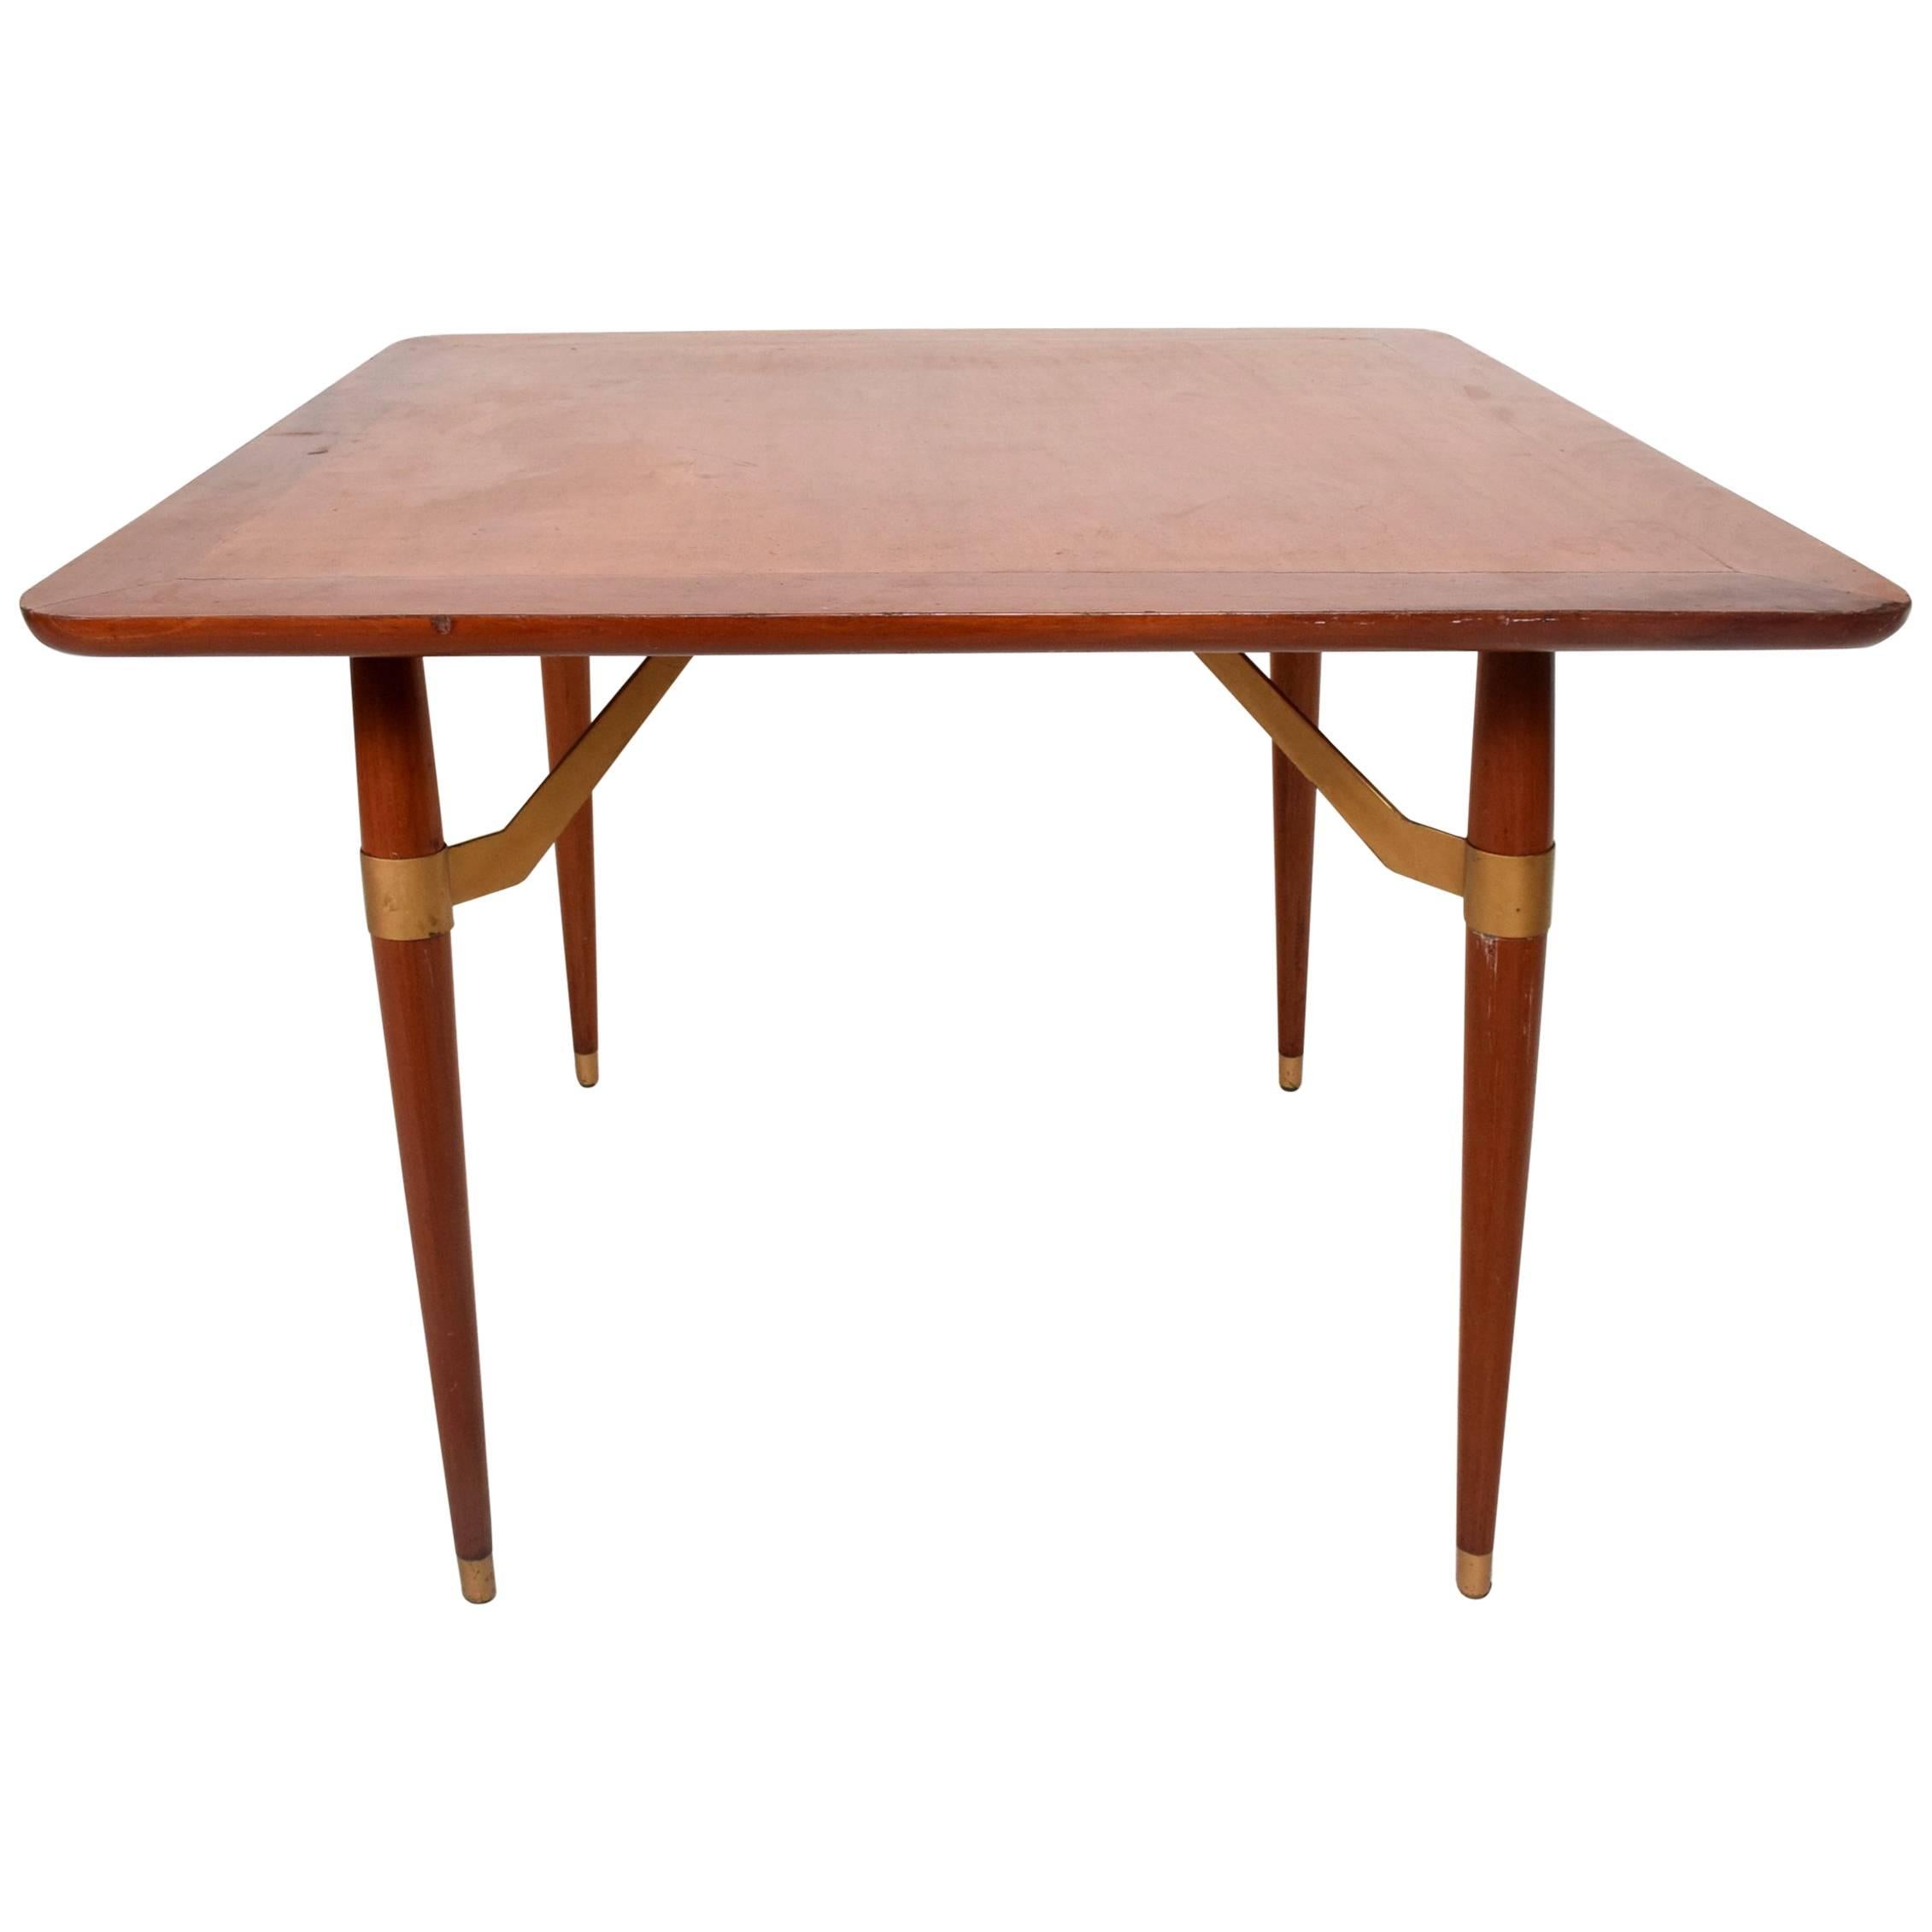 For your consideration a Mexican modernist game or dining table in mahogany wood.

Legs have a tapered finish with stretchers painted in gold or brass.

Constructed with dove tail joints. 

Measures: 28 5/8